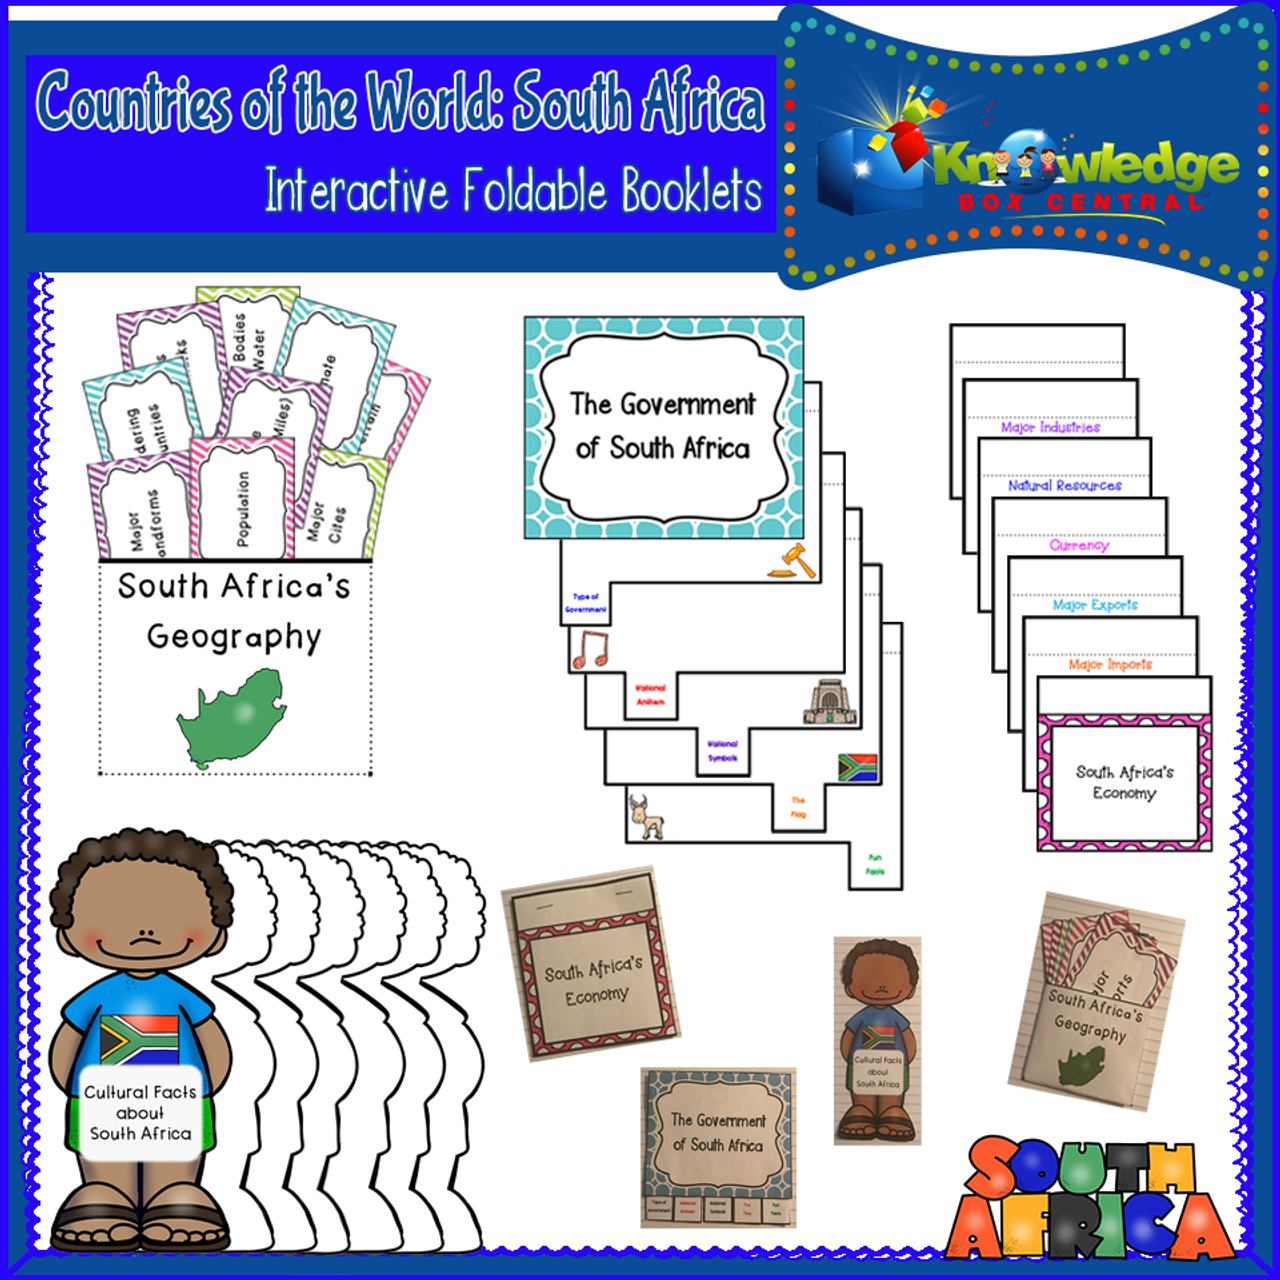 Countries of the World: South Africa Interactive Foldable Booklets